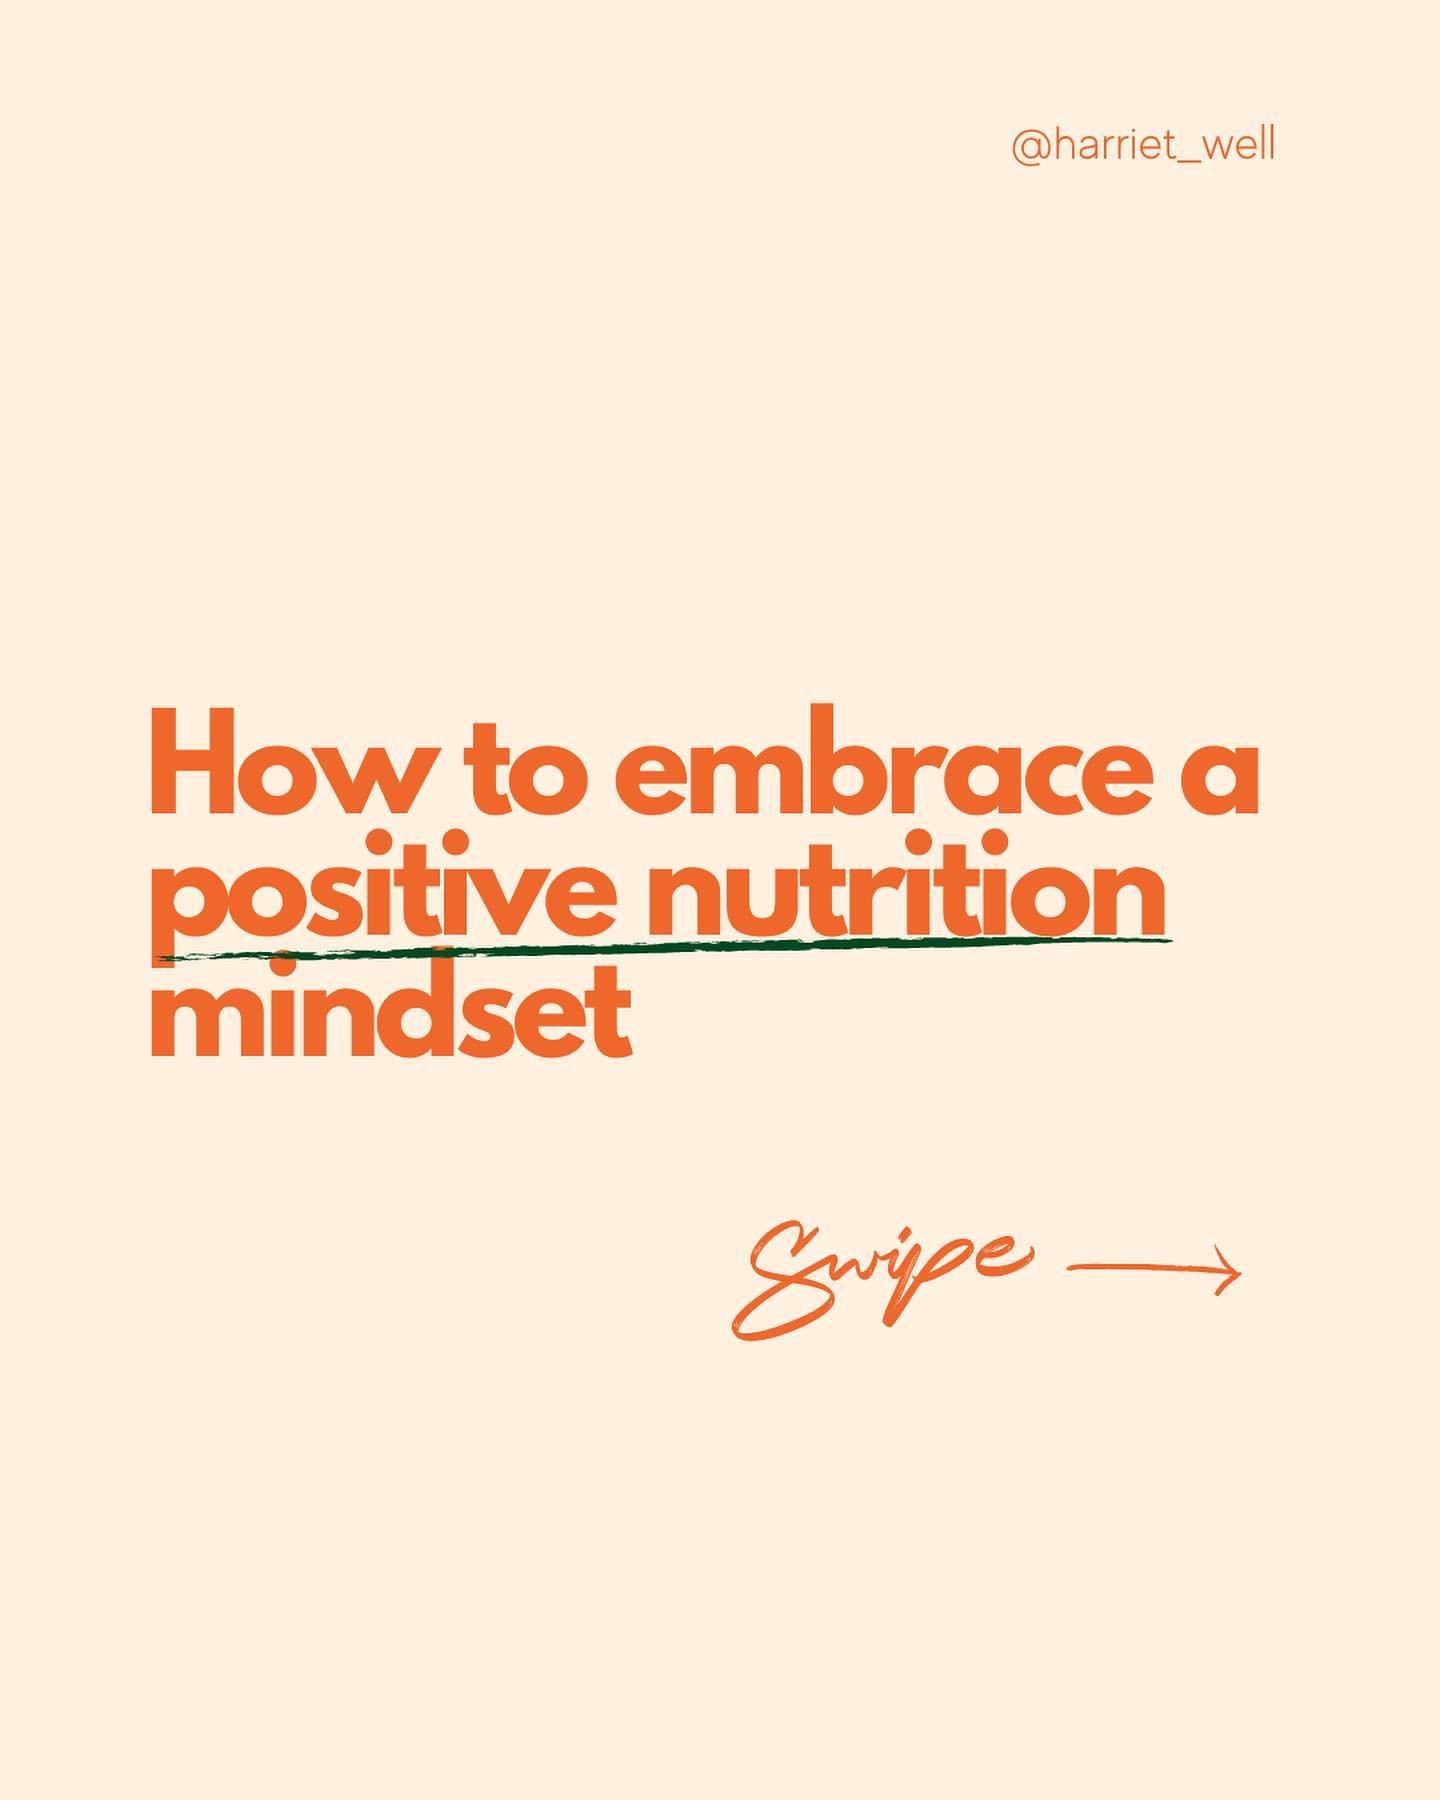 5 ways to embrace a positive nutrition mindset ➡️

1. Focus on addition, not restriction
2. Stop labelling food as &ldquo;good&rdquo; or &ldquo;bad&rdquo;
3. Ditch the all-or-nothing mindset
4. Practice mindful eating
5. Cultivate self-compassion 

H